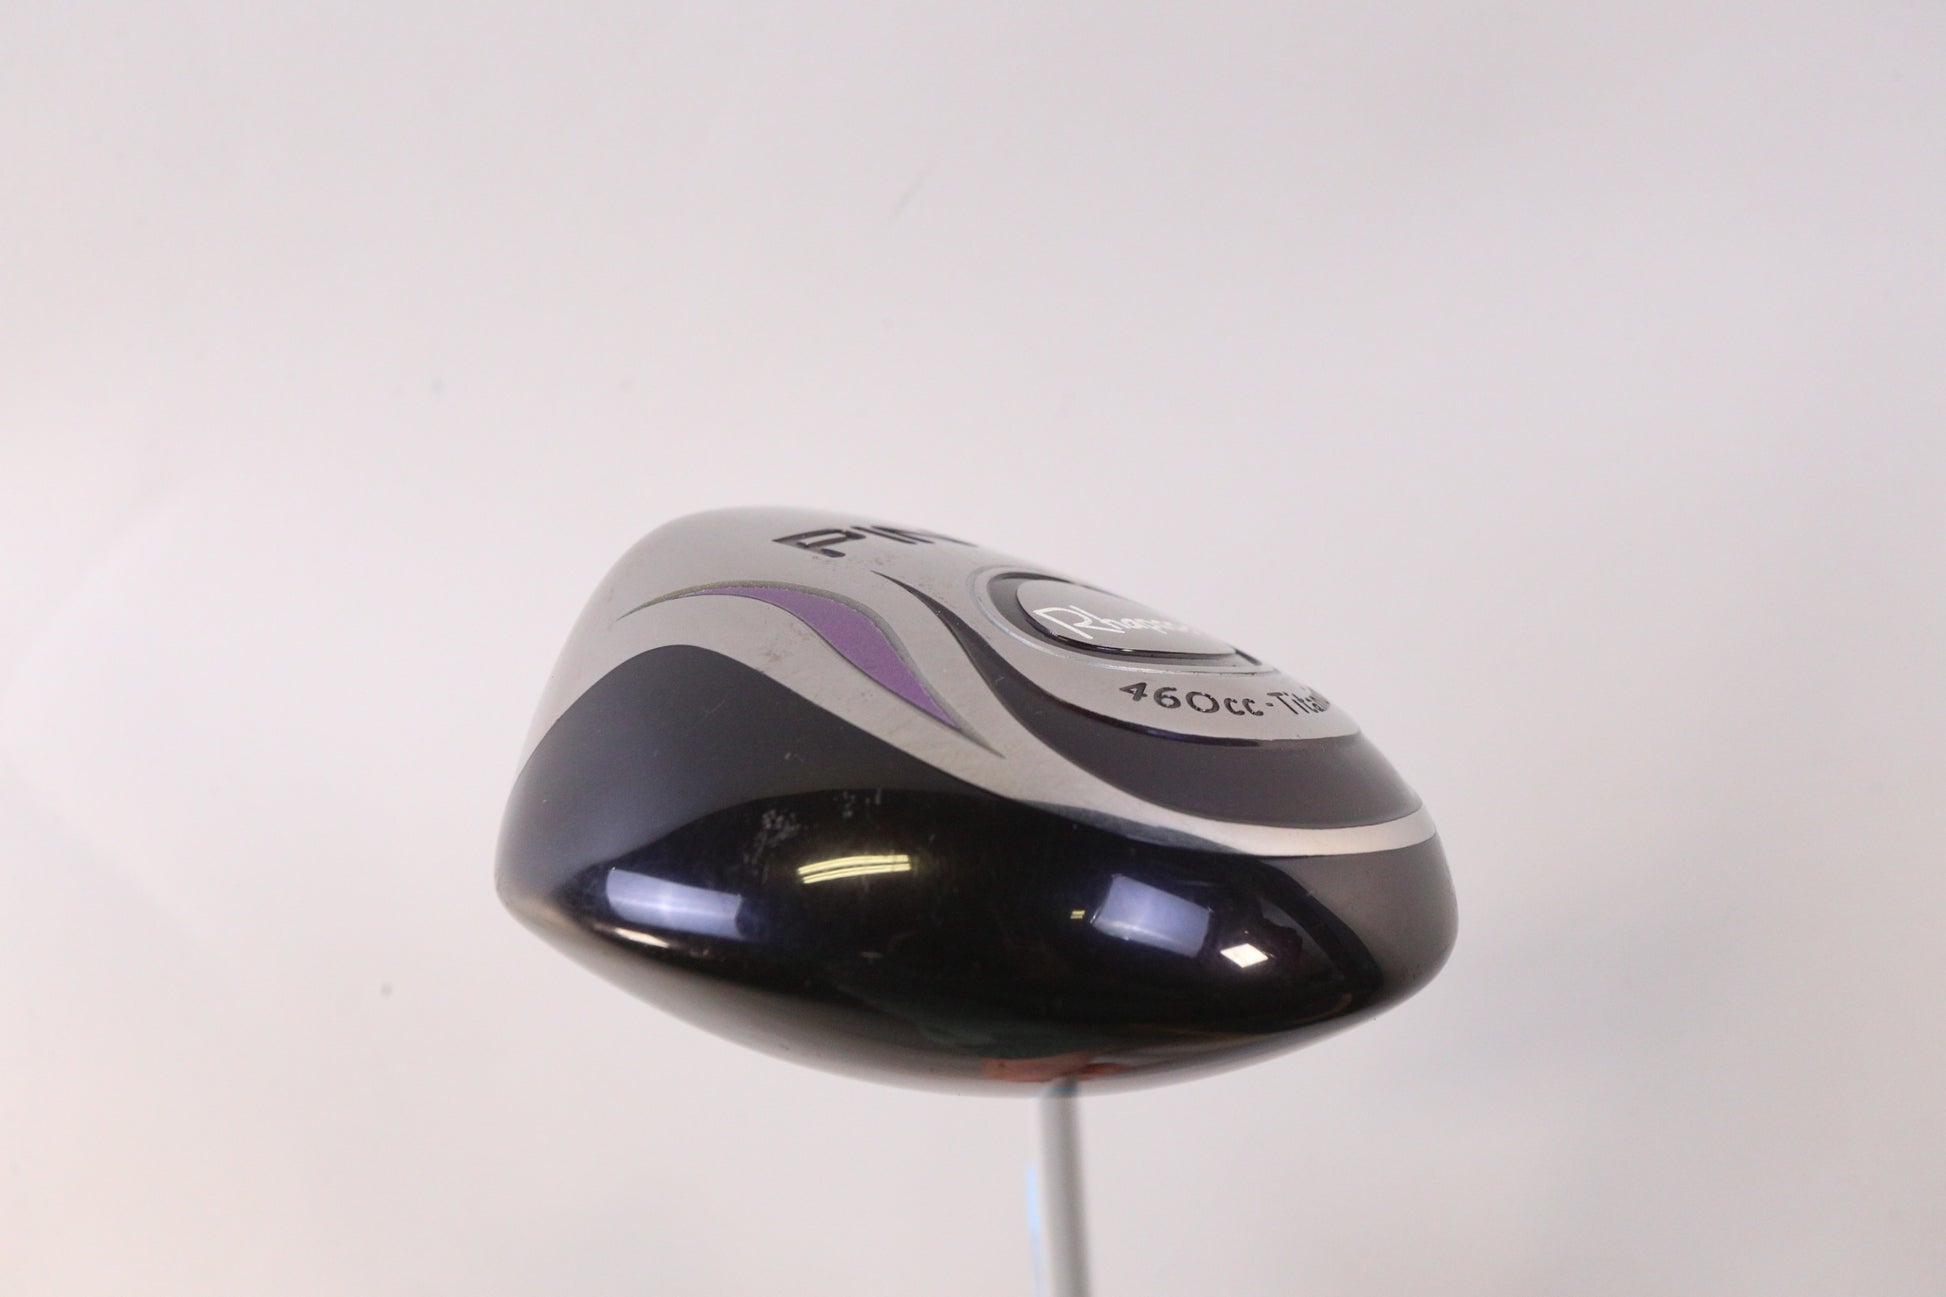 Used Ping Rhapsody Driver - Right-Handed - 14 Degrees - Ladies Flex-Next Round